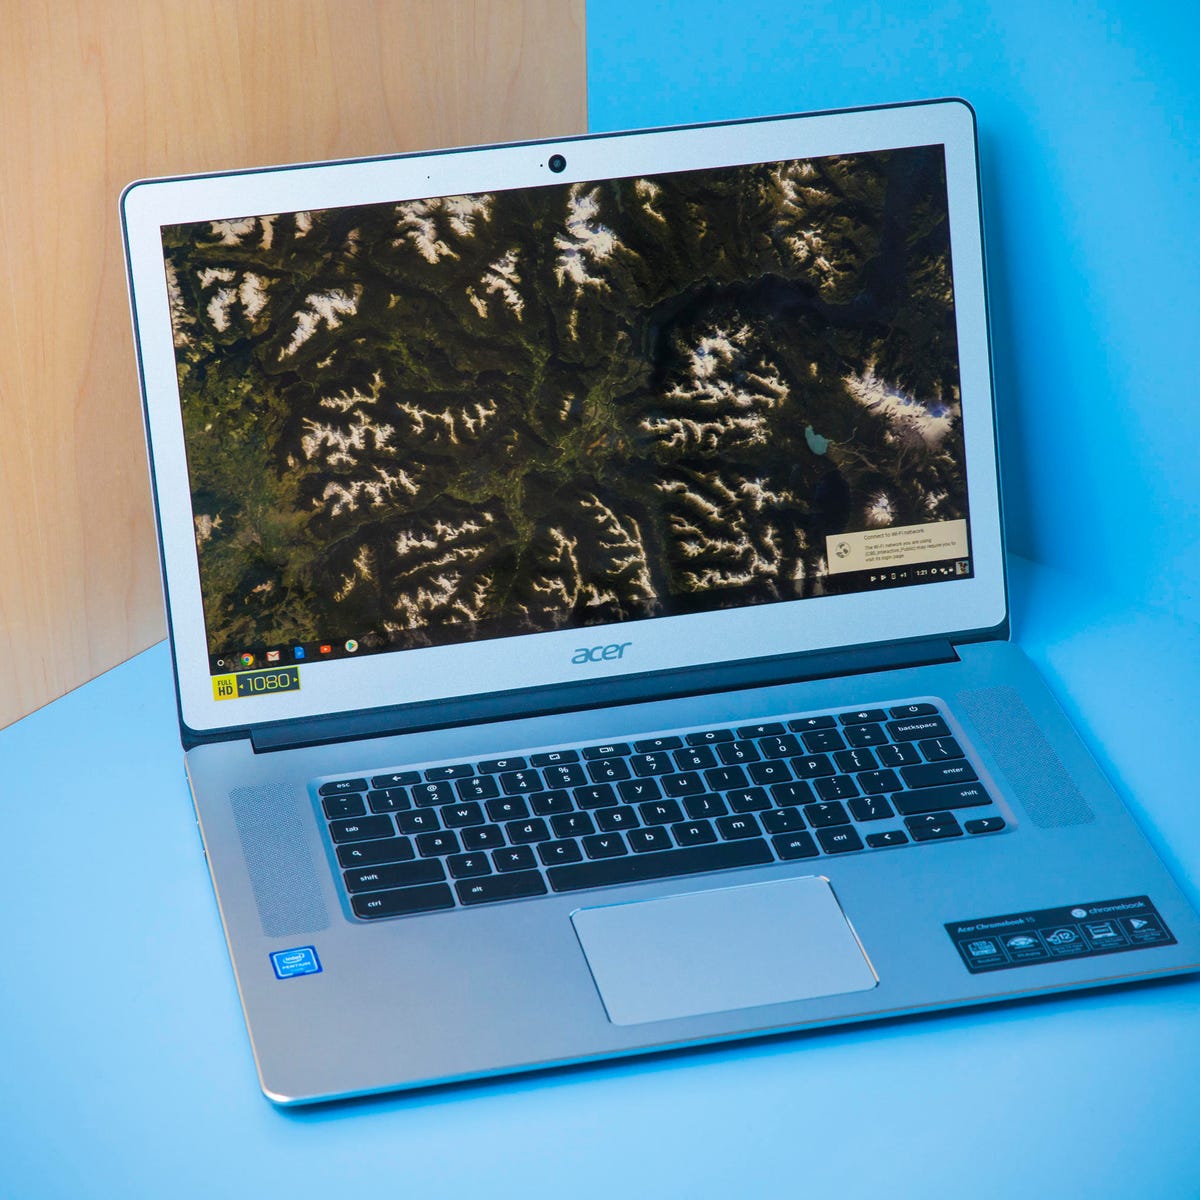 Acer Chromebook 15 review: This big Chromebook is a big bargain - CNET